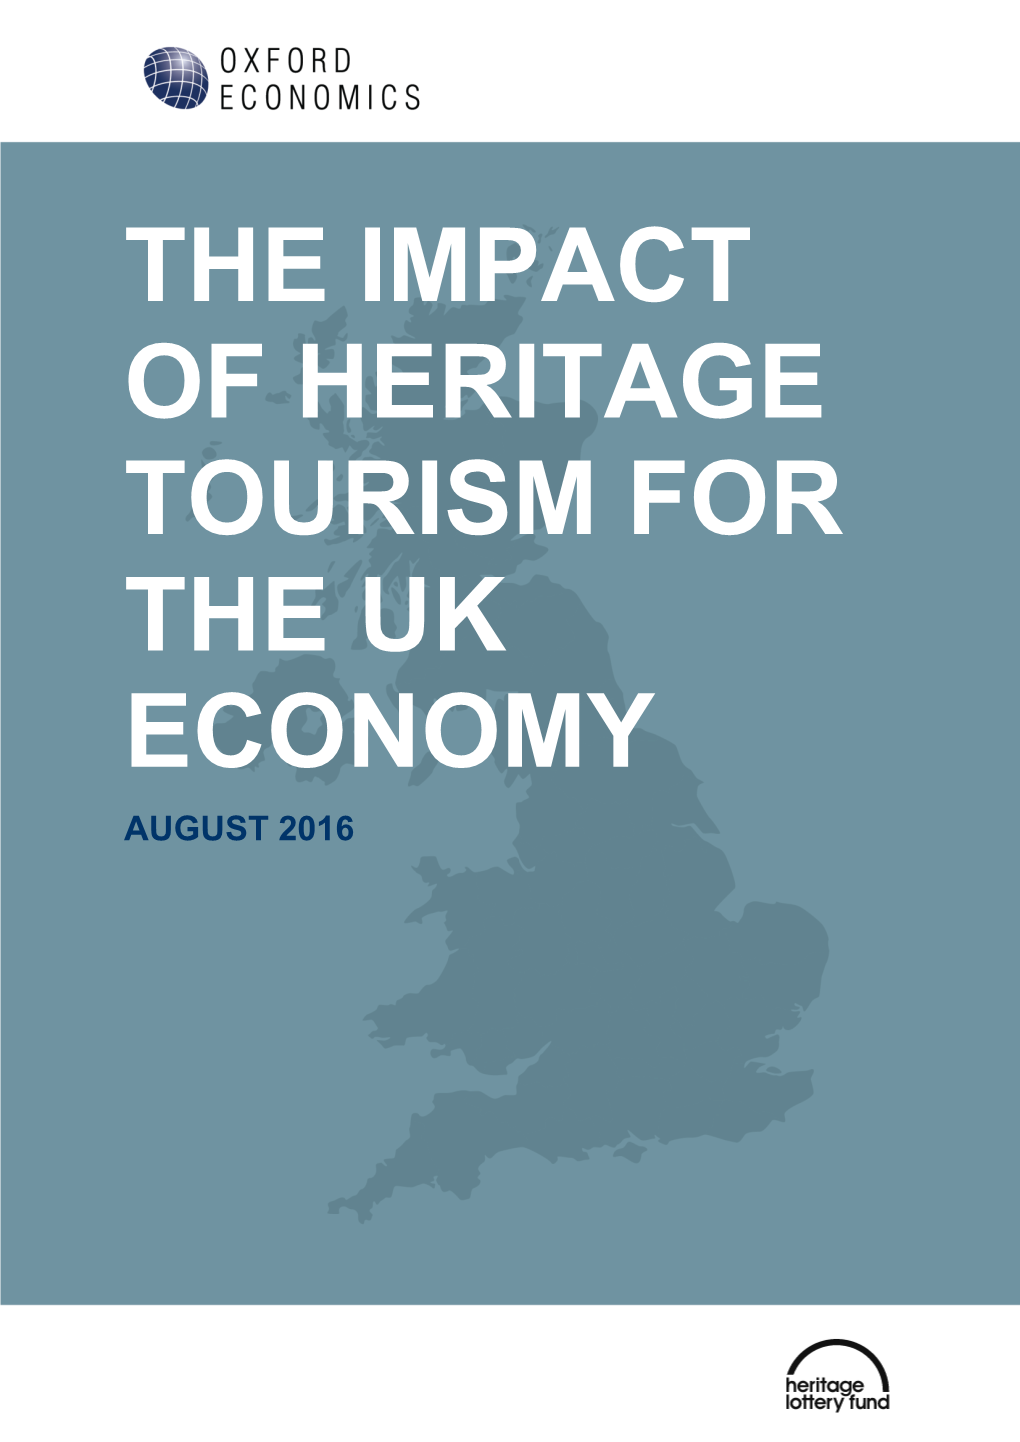 The Impact of Heritage Tourism for the UK Economy